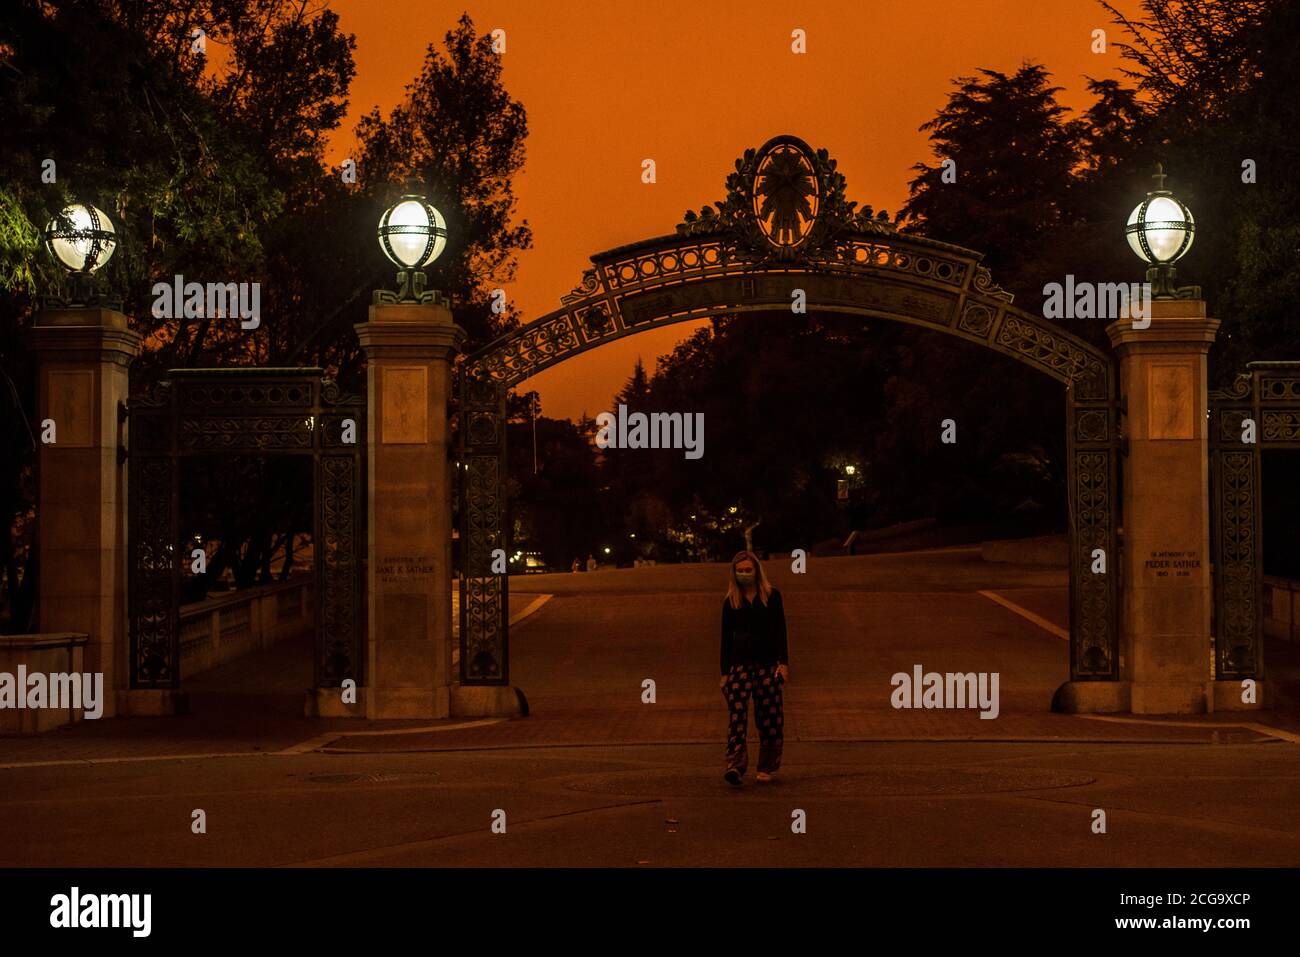 Sather gate on the campus of University of California Berkeley, campus is nearly empty due to the unsafe air quality caused by smoke from wildfires. Stock Photo